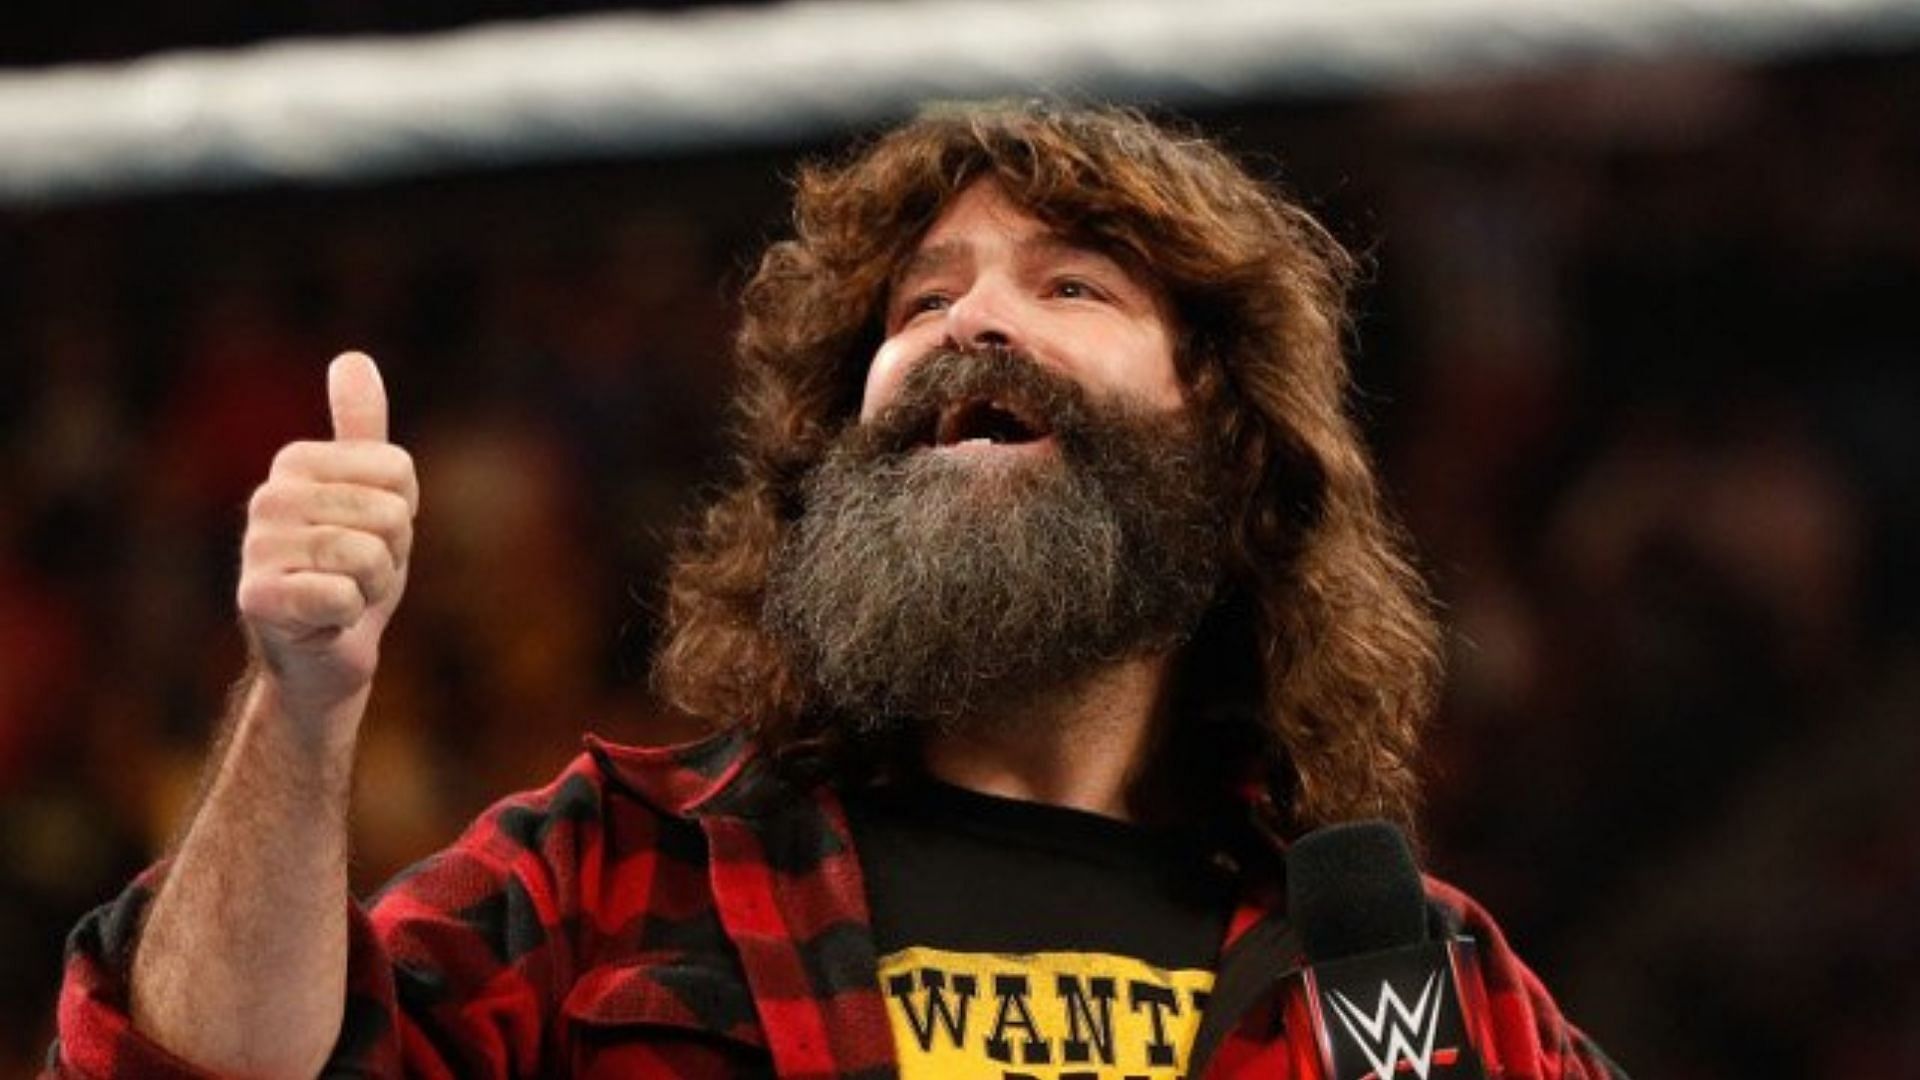 Mick Foley has high praise for a new arrival in AEW